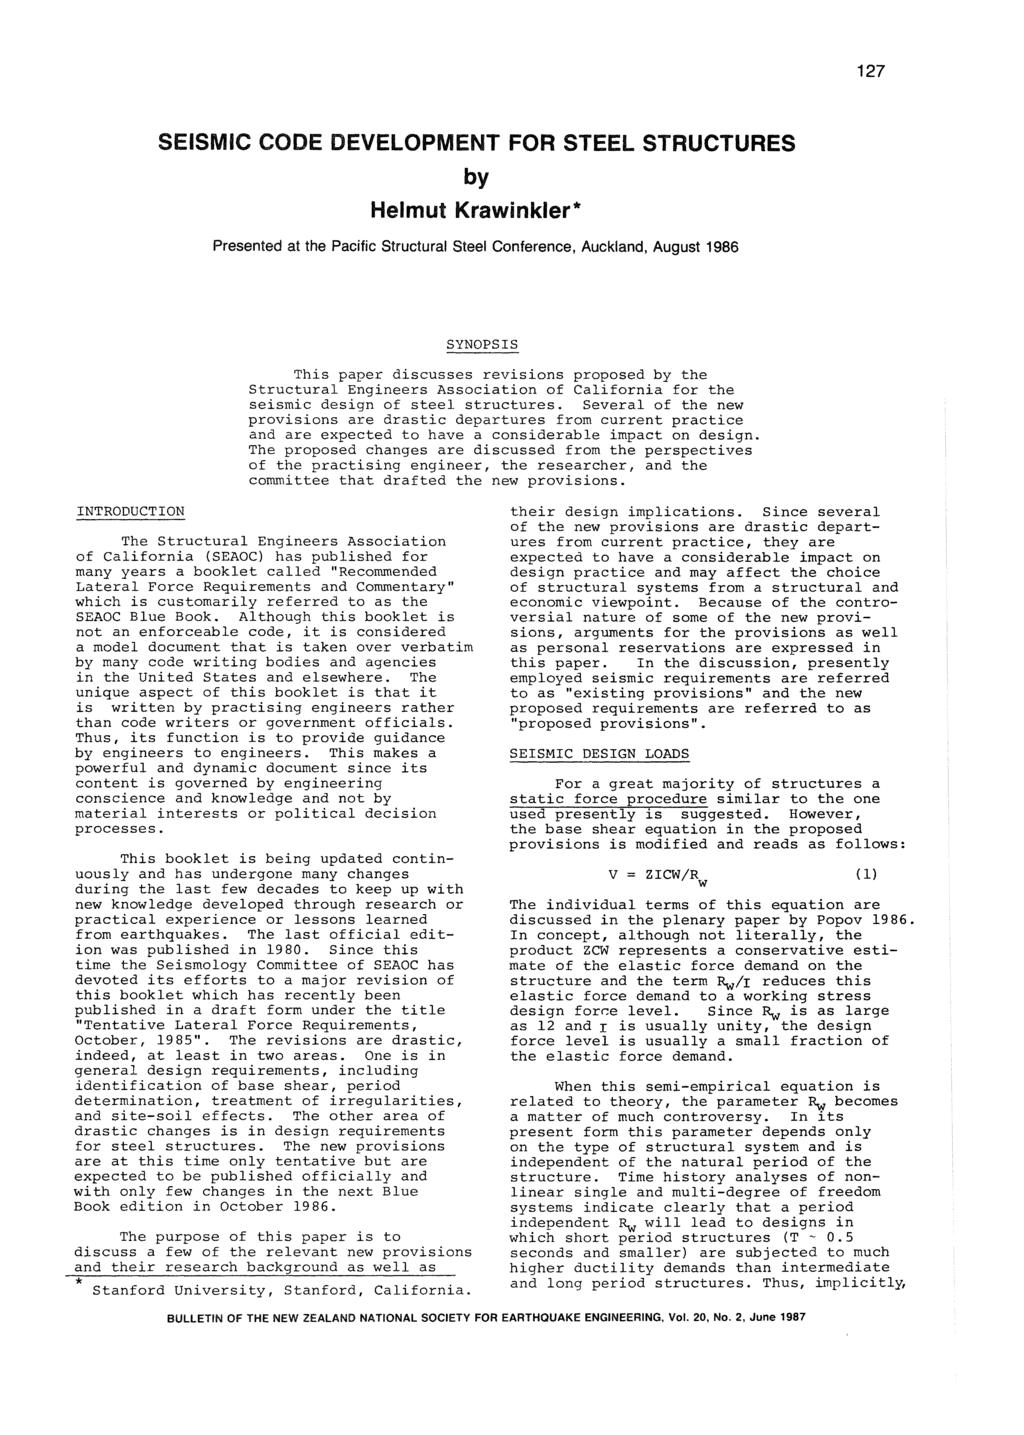 127 SEISMIC CODE DEVELOPMENT FOR STEEL STRUCTURES by Helmut Krawinkler* Presented at the Pacific Structural Steel Conference, Auckland, August 1986 SYNOPSIS This paper discusses revisions proposed by